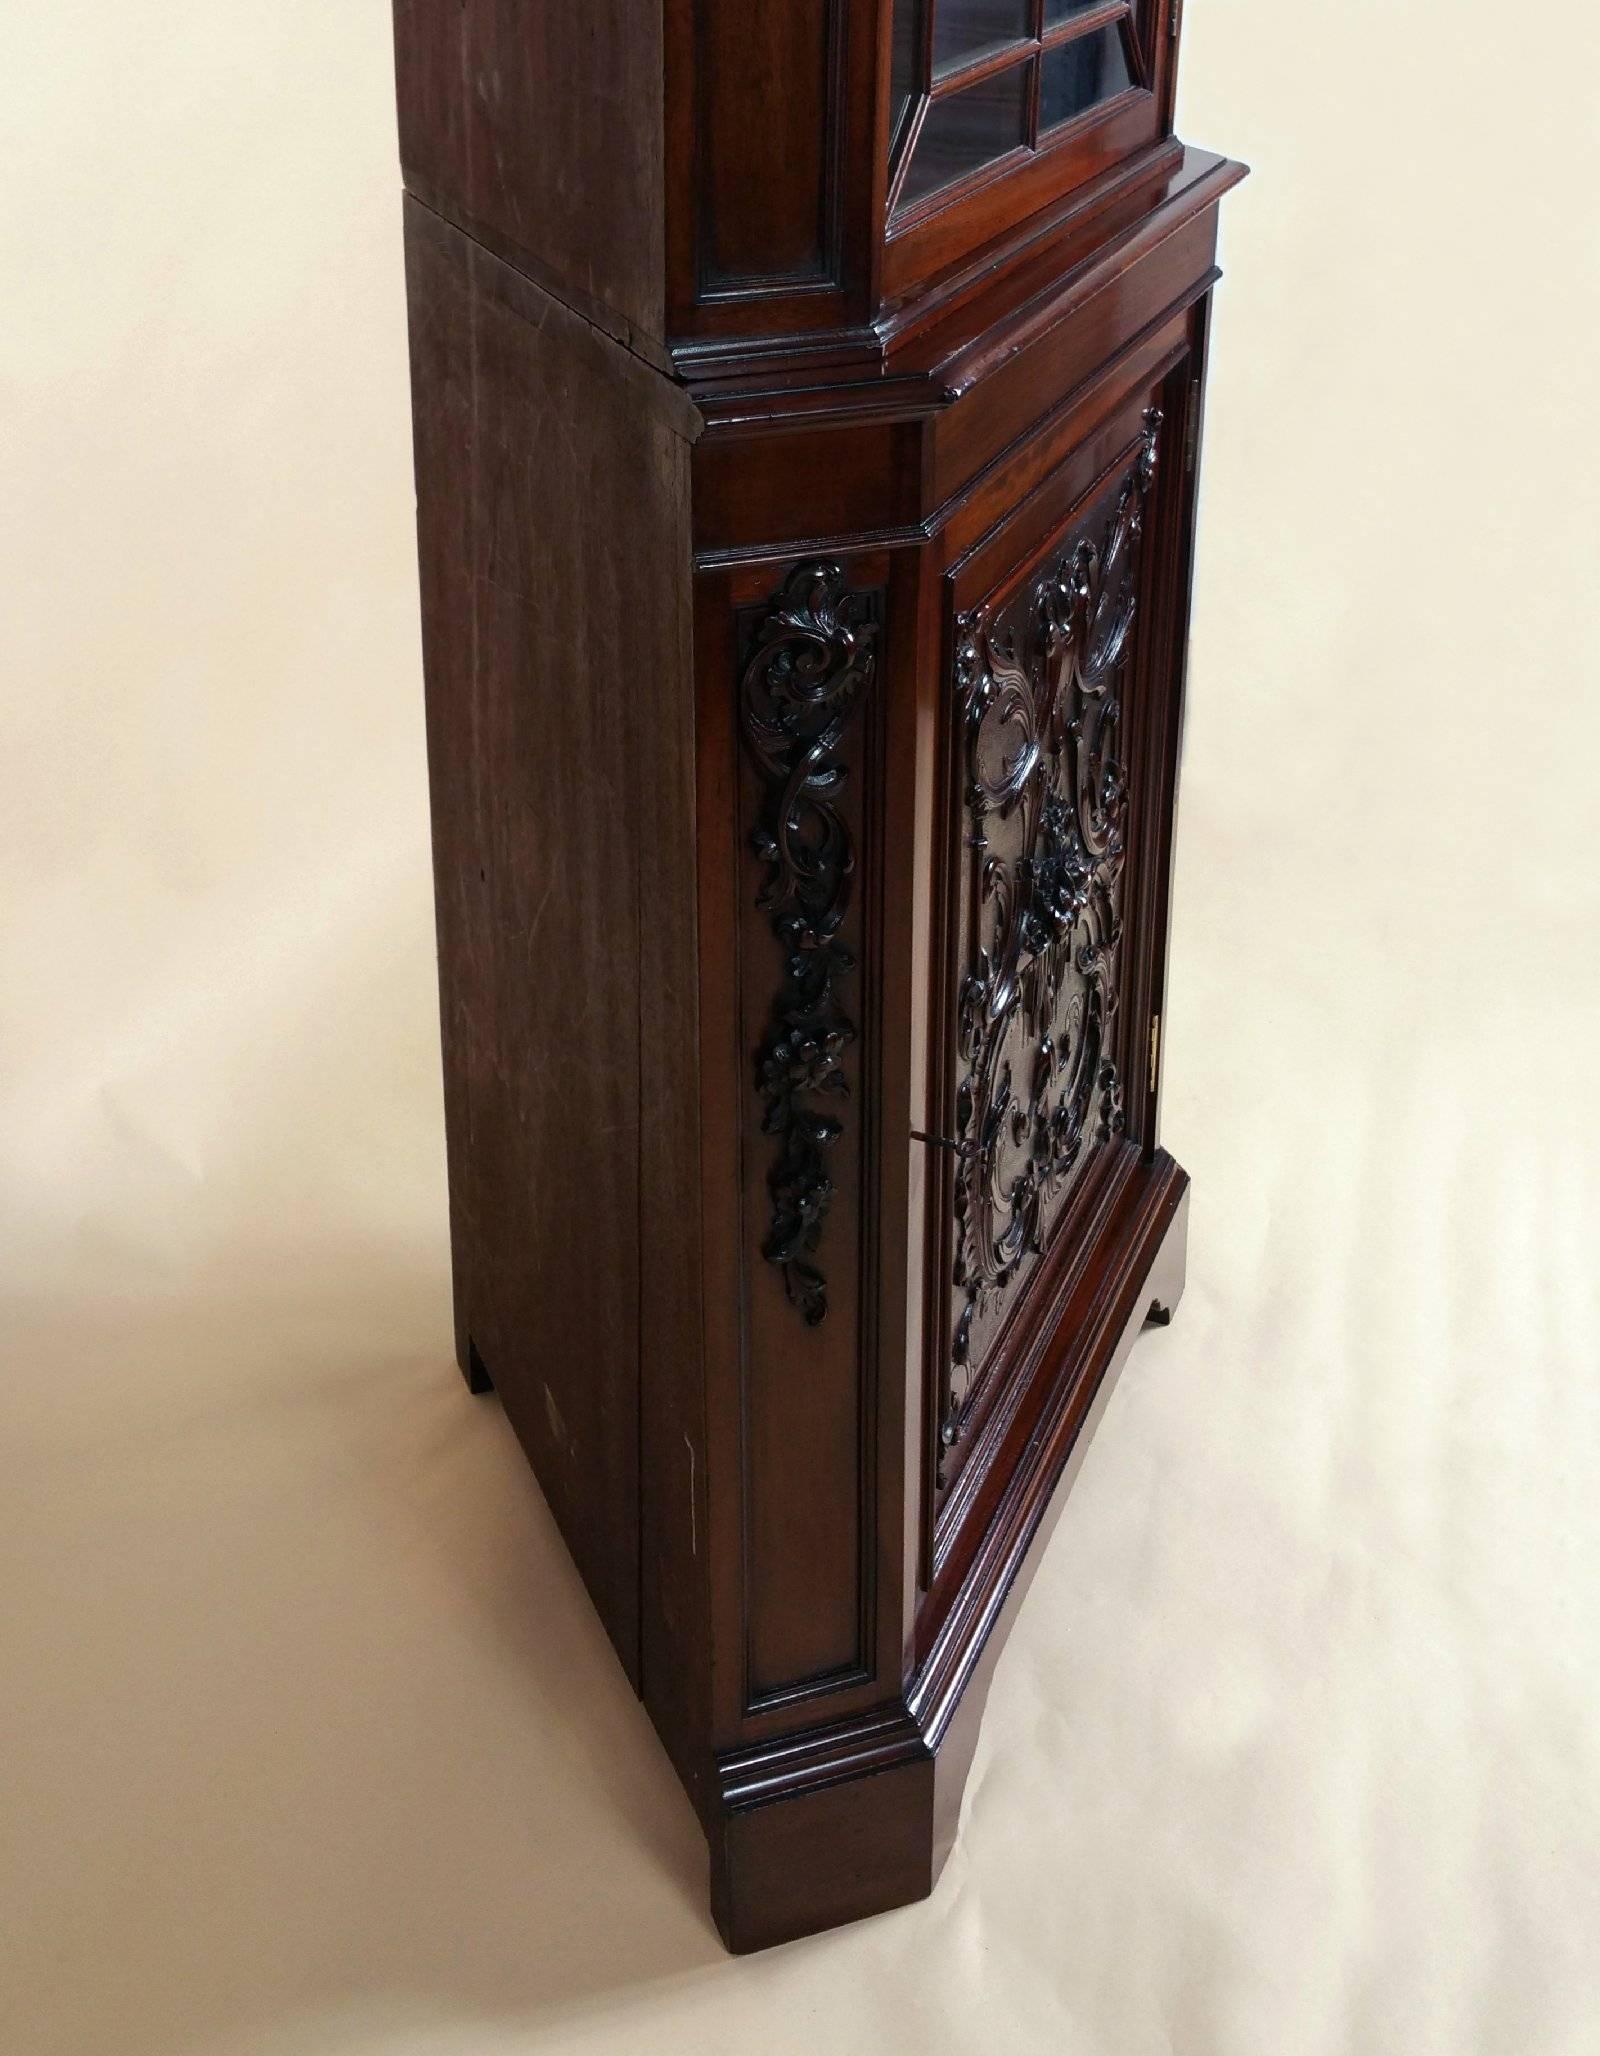 This superb quality and very striking late 19th century mahogany Chippendale style corner cabinet was made by Edwards & Roberts, who were well-known cabinet makers of the period. The firm Edwards and Roberts were among the best English antique